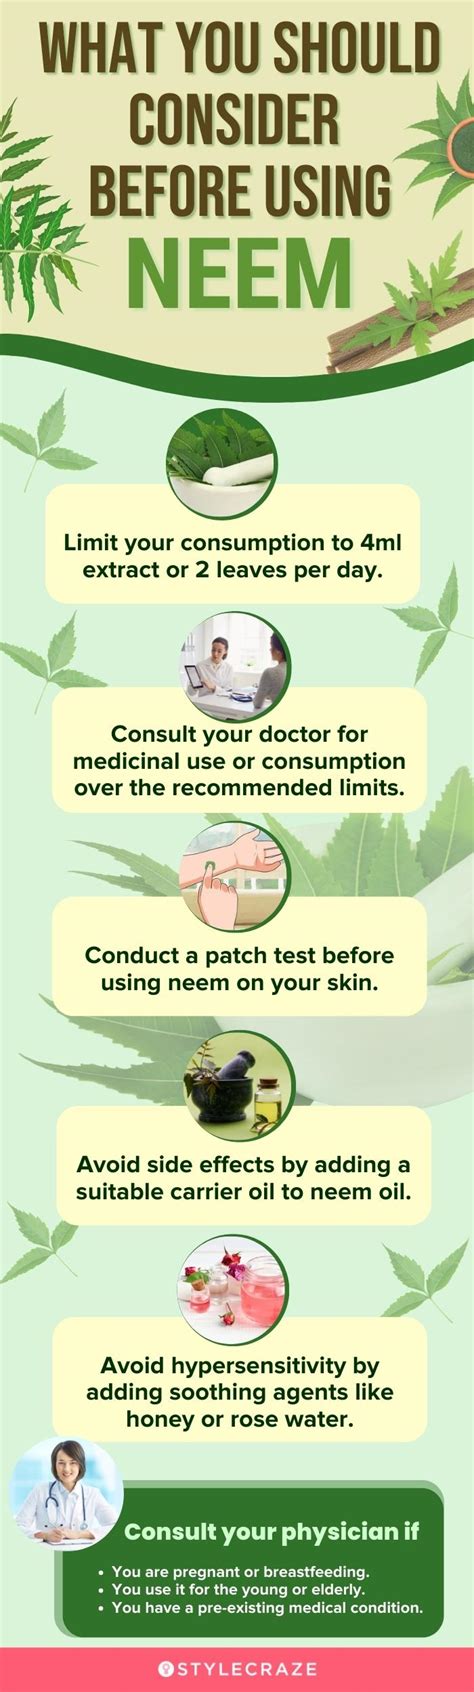 What is the negative effect of neem?